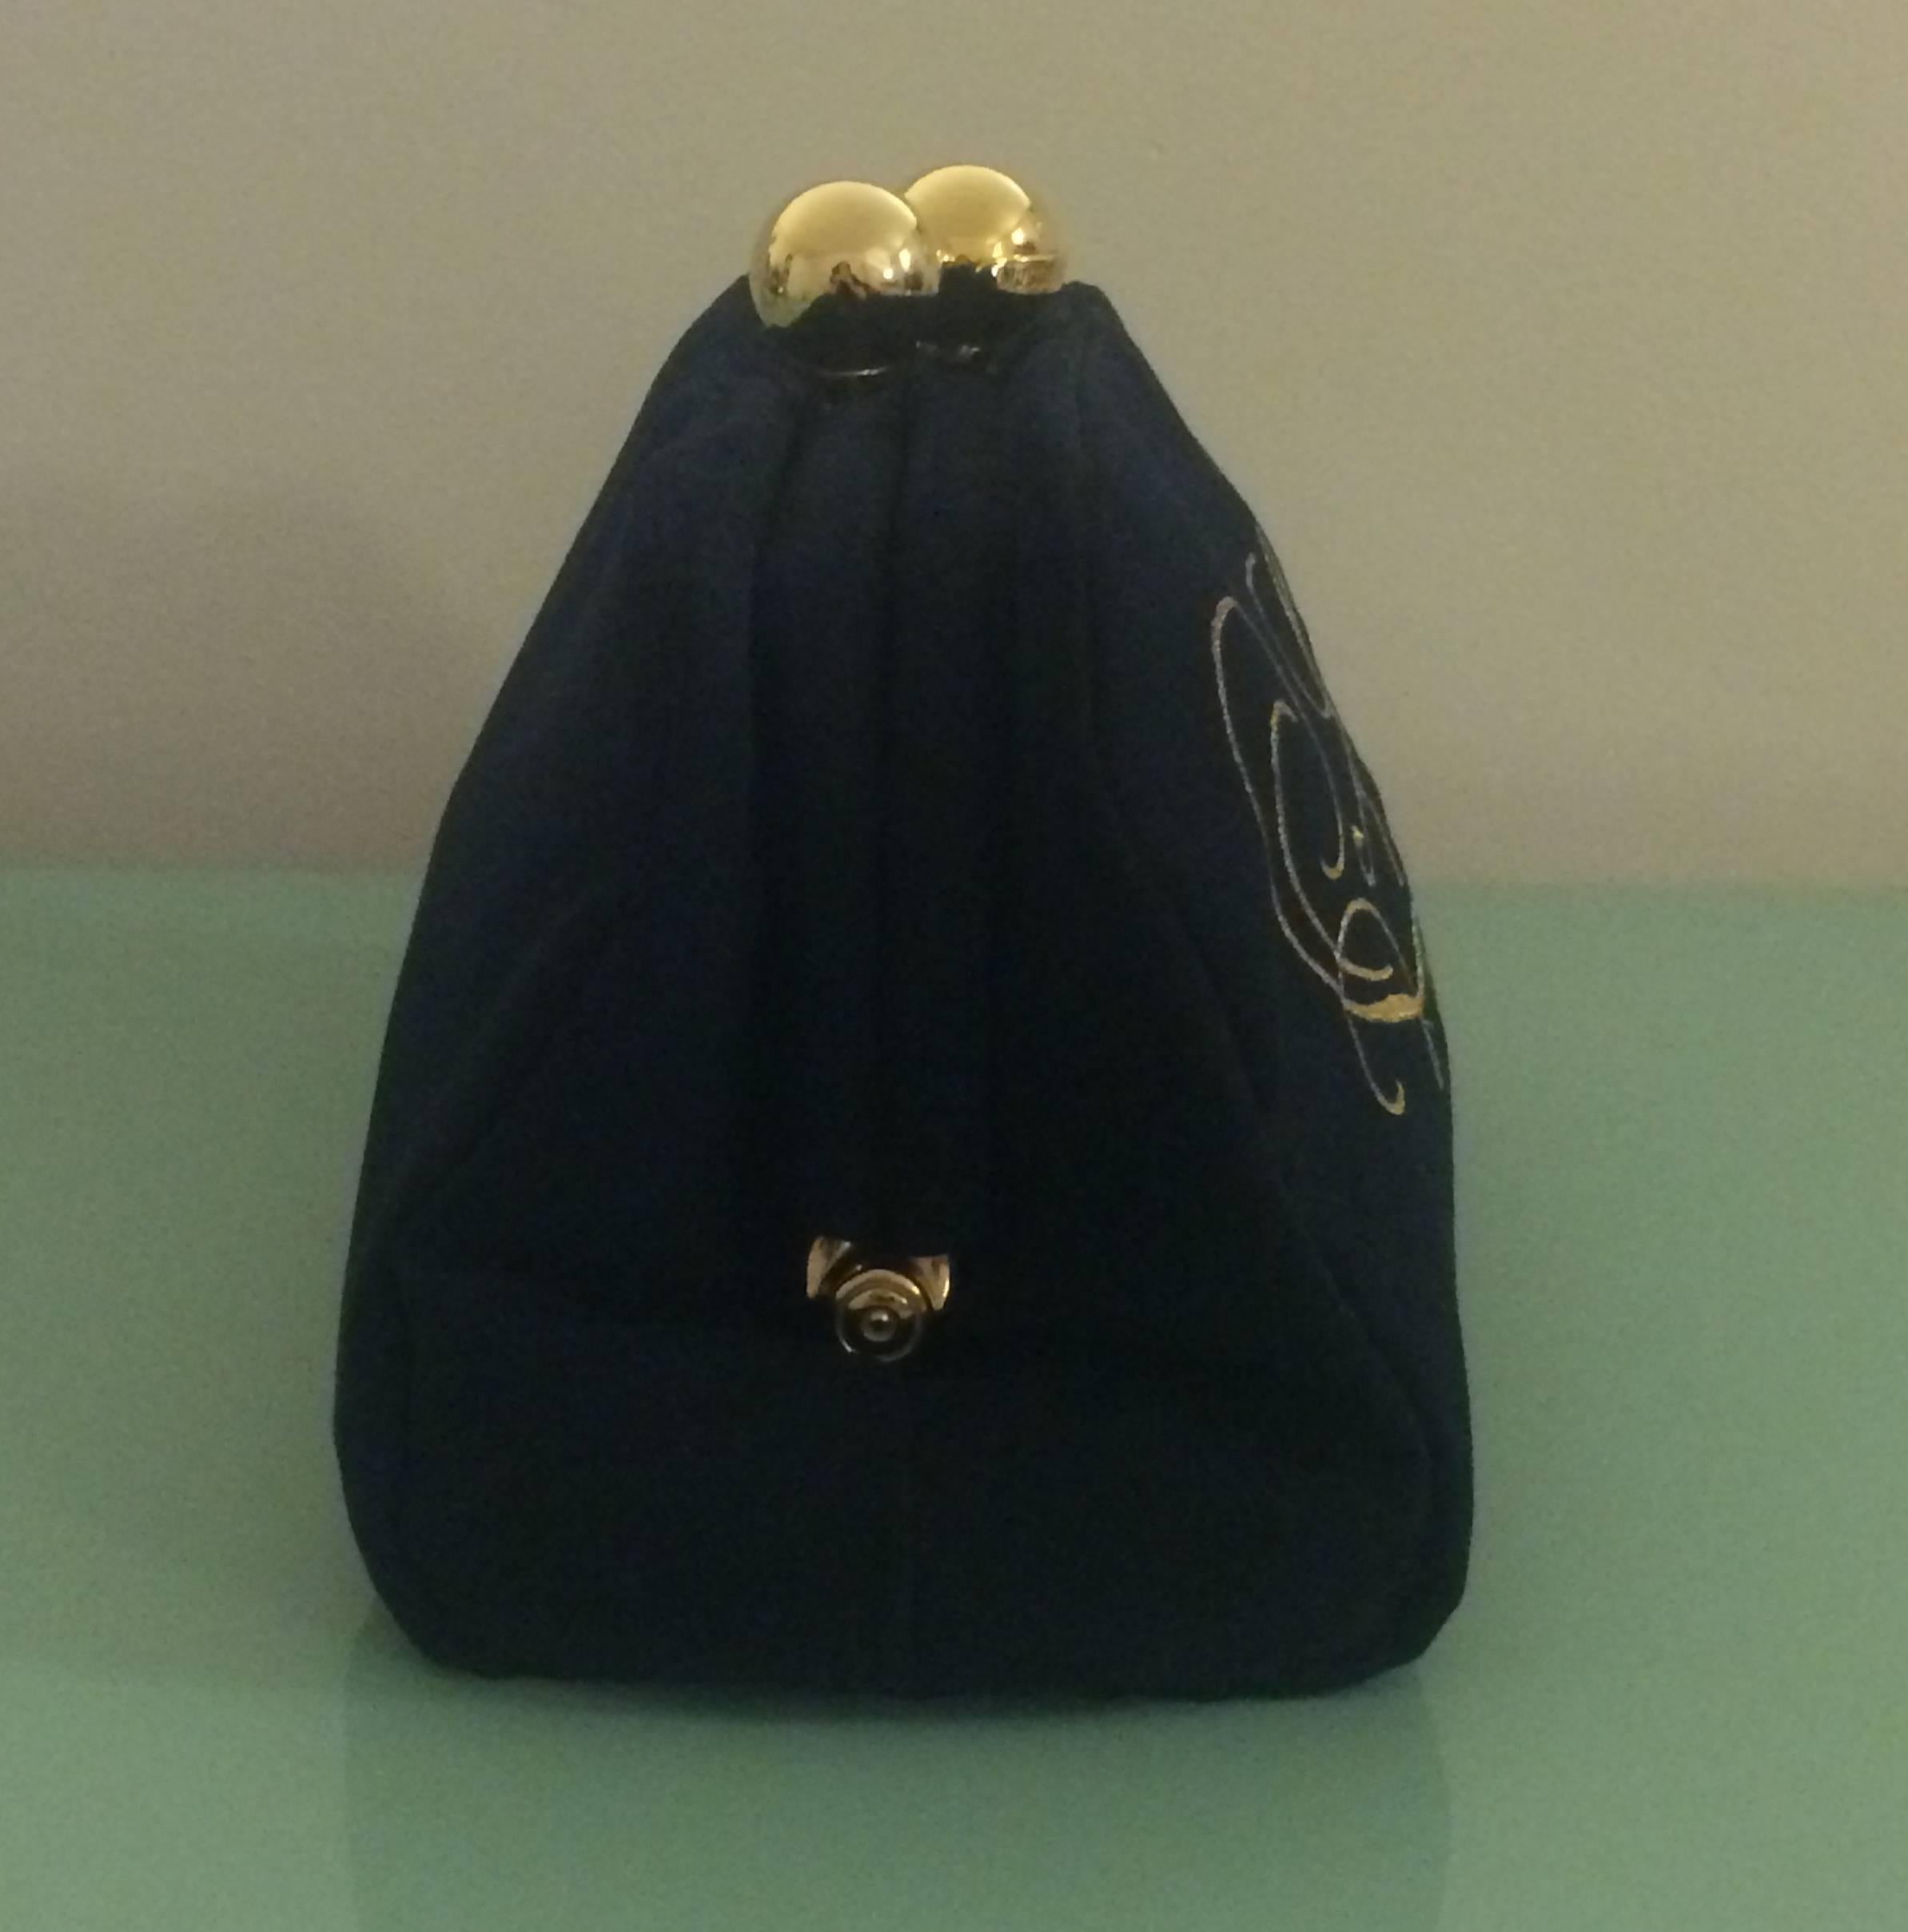 Moschino Redwall 1990's super-soft black clutch reads 'Soft!' in curling gold embroidery. Signed 'Moschino at gold ball on top.' Hinge closure (kisslock at top is decorative.)

Large main compartment and small interior zippered pocket.

Made in